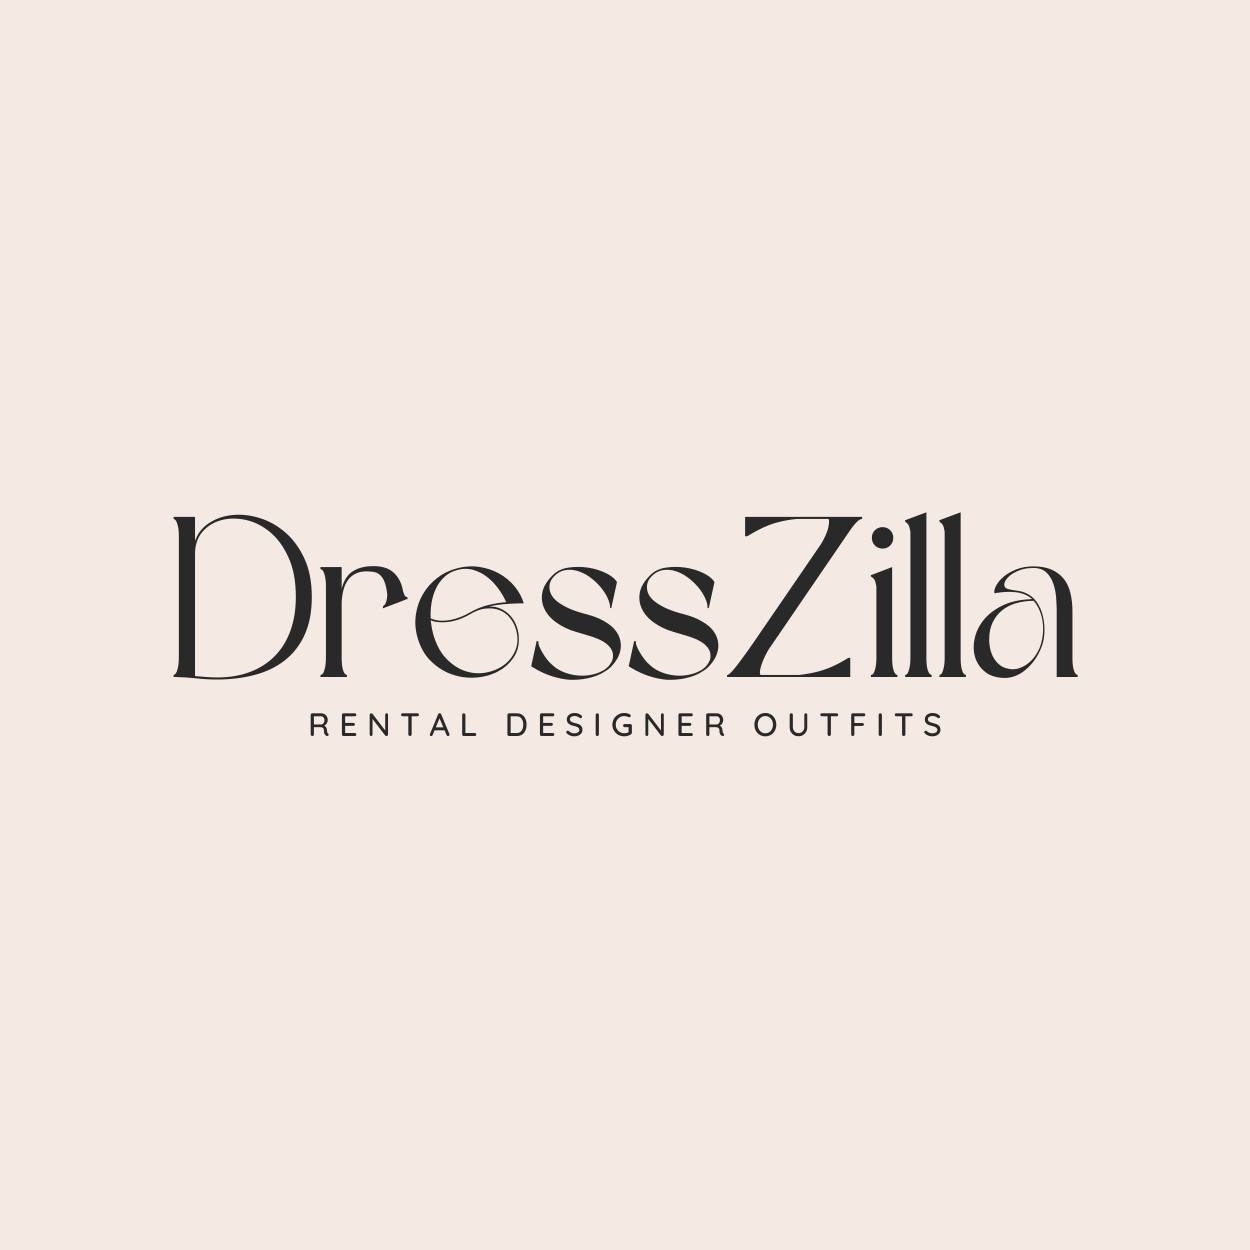 Dresszilla- Men’s rental outfit in Jaipur, Men’s dress on rent in Jaipur, Three peace suit on rent in Jaipur|Shops|Local Services